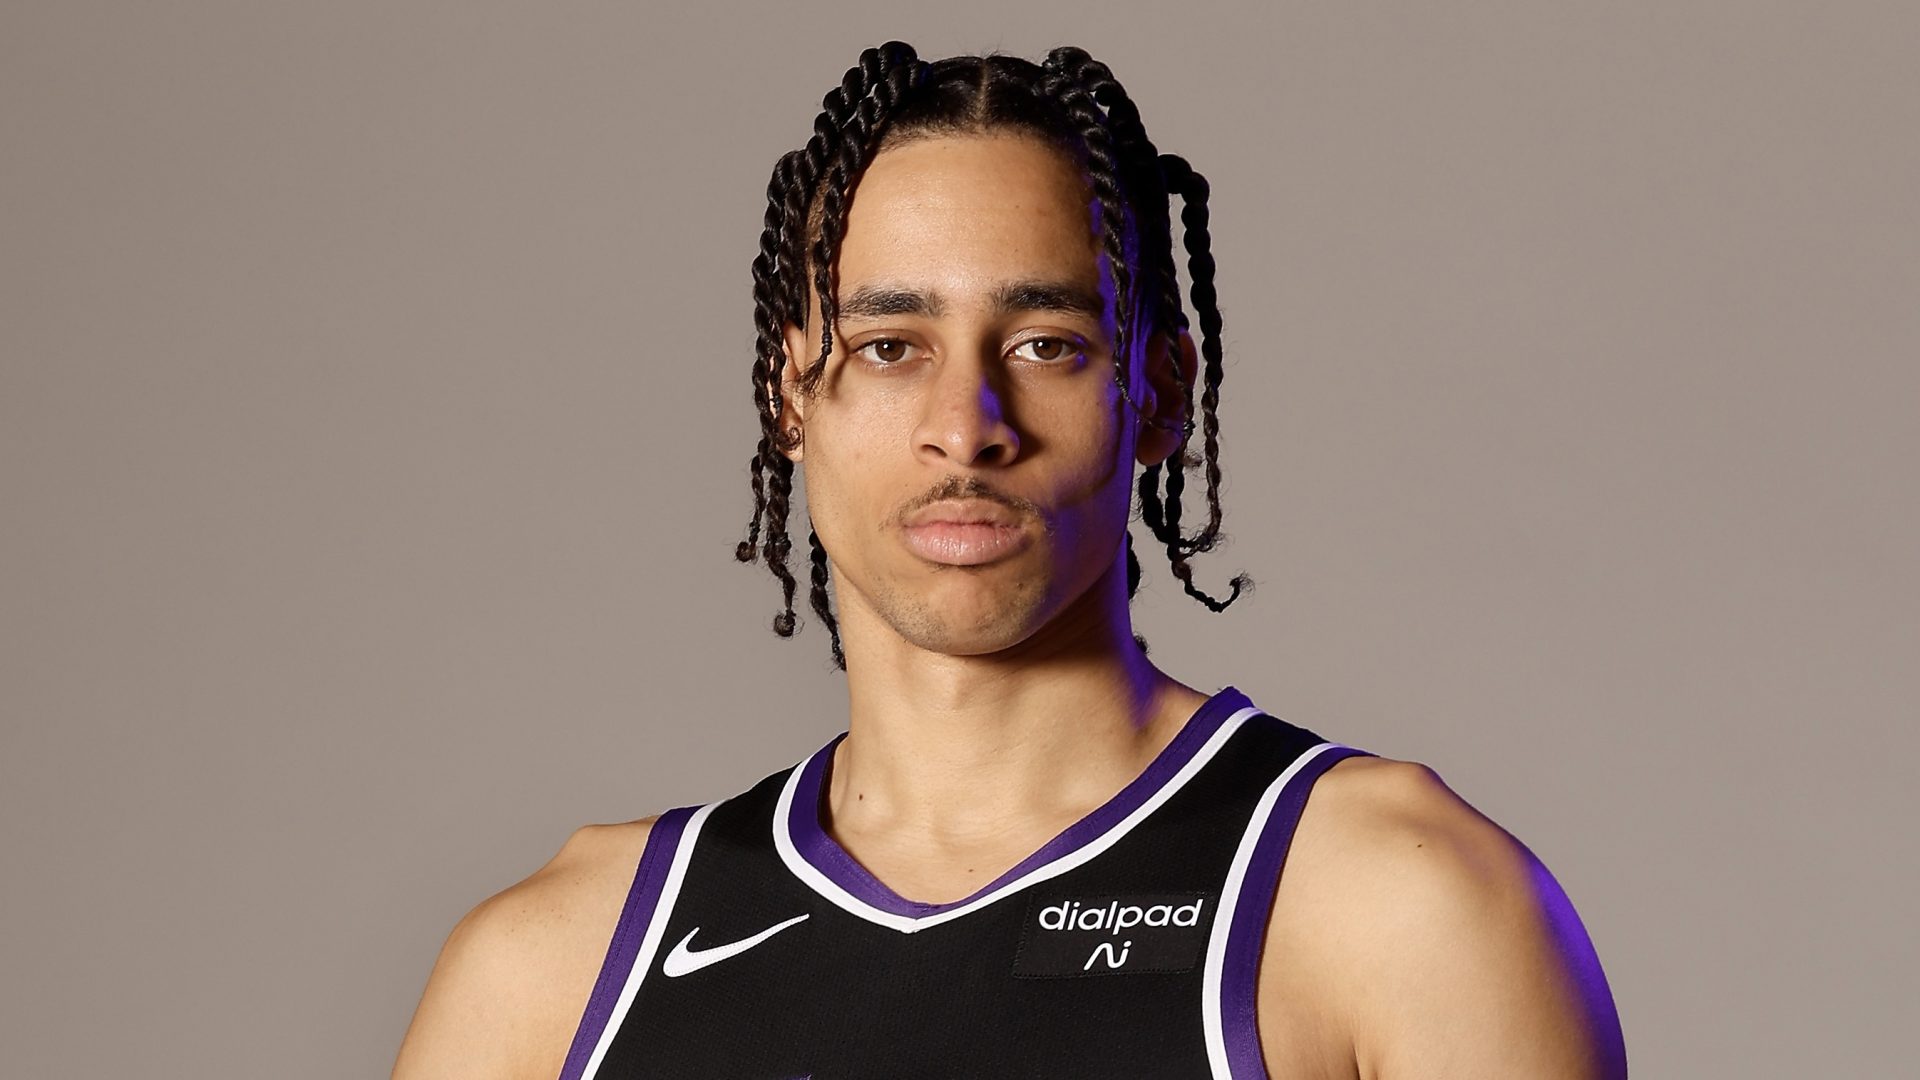 Former NBA G League Player Chance Comanche And 19-Year-Old Woman Arrested & Charged With Murder